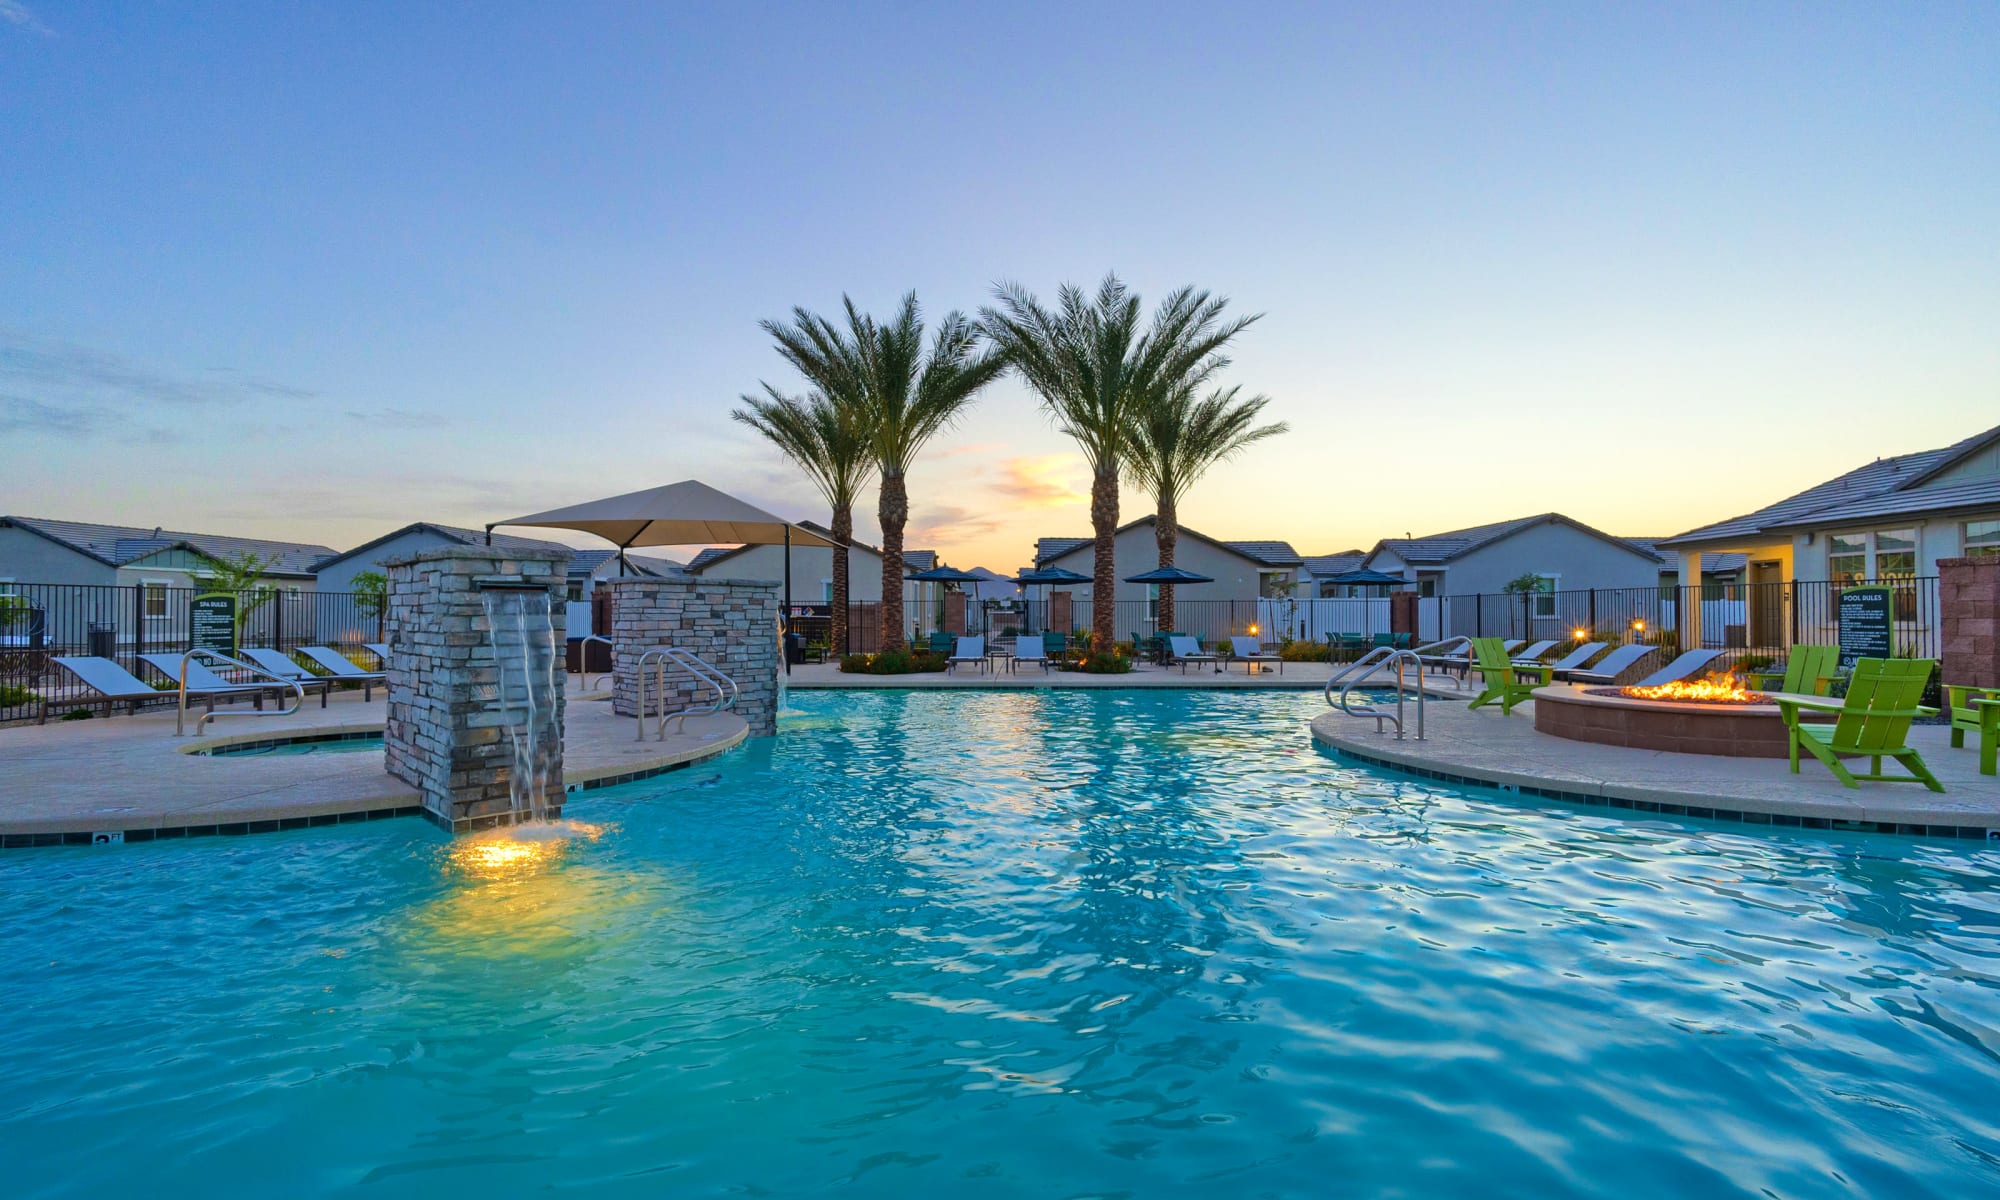 Luxurious pool with fire pit at Estia Windrose in Litchfield Park, Arizona